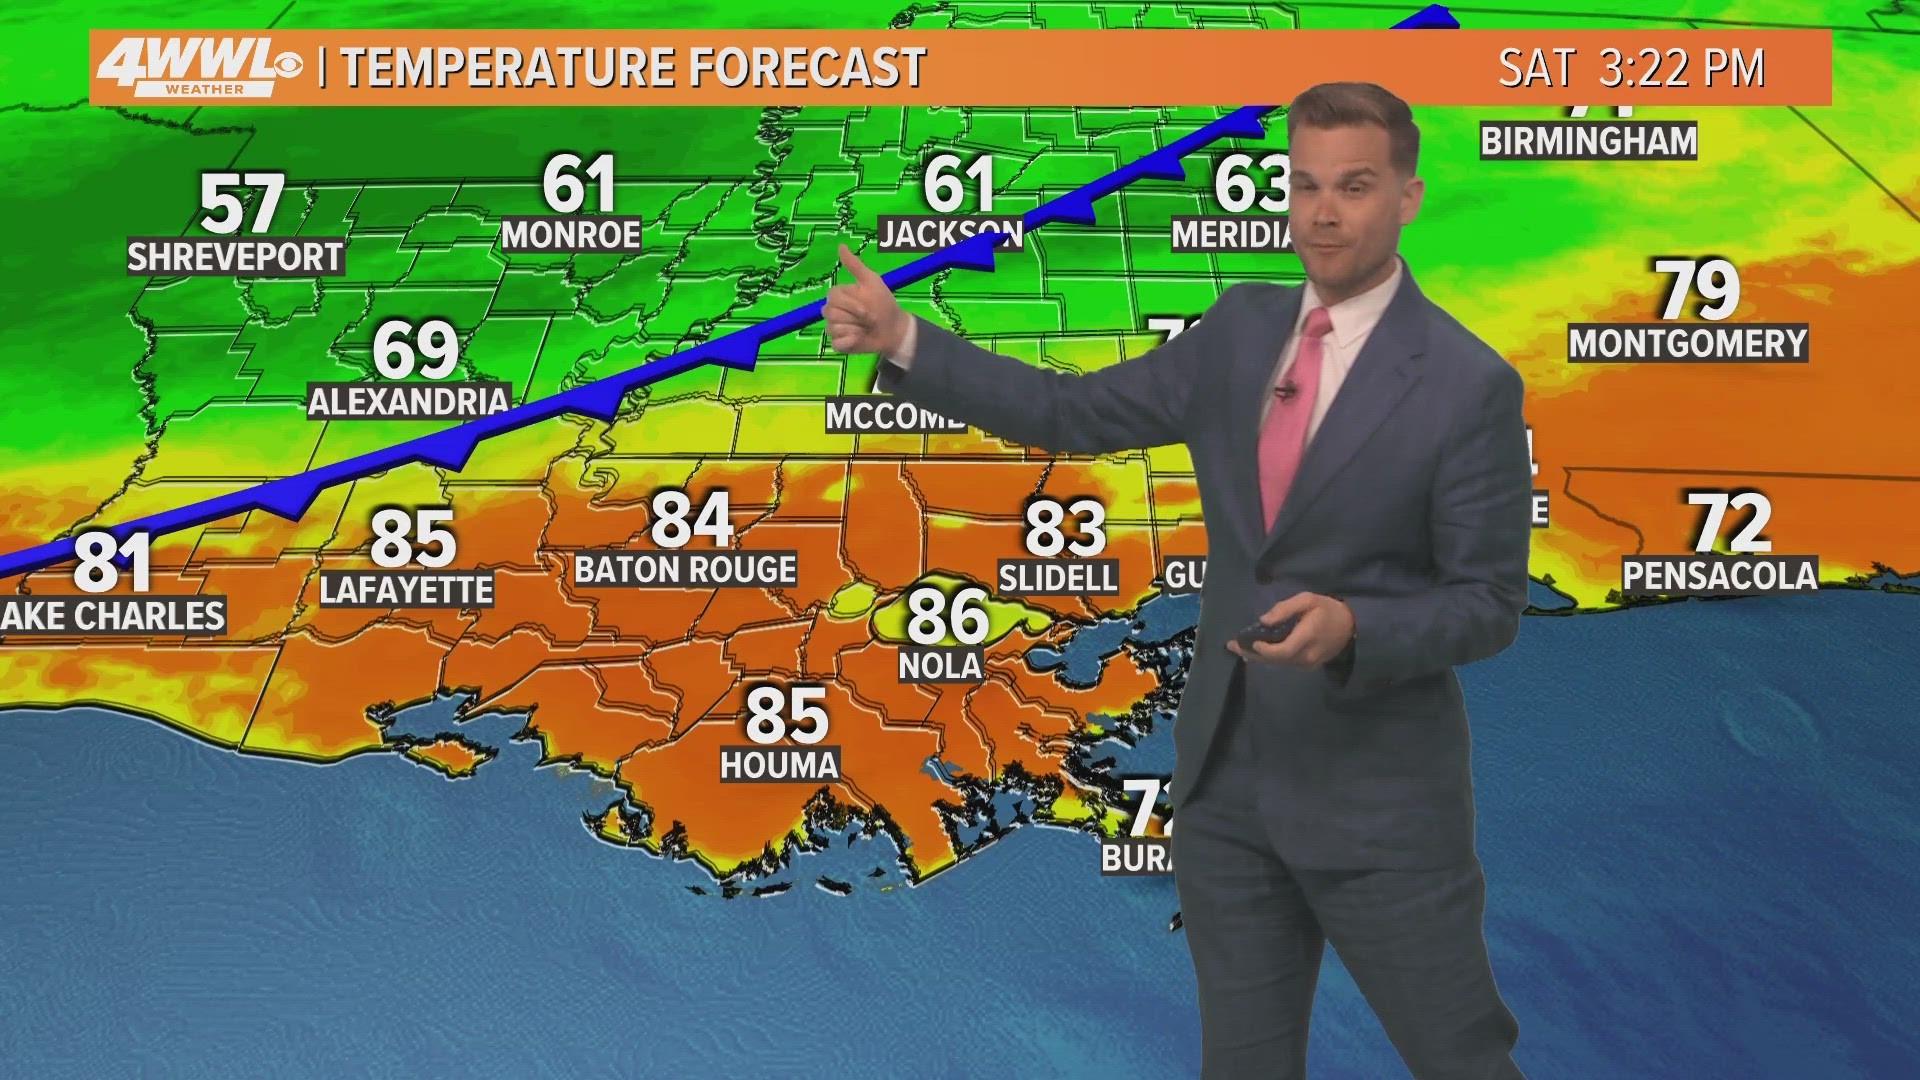 Temperatures will go from the 80s Saturday to the 60s Sunday